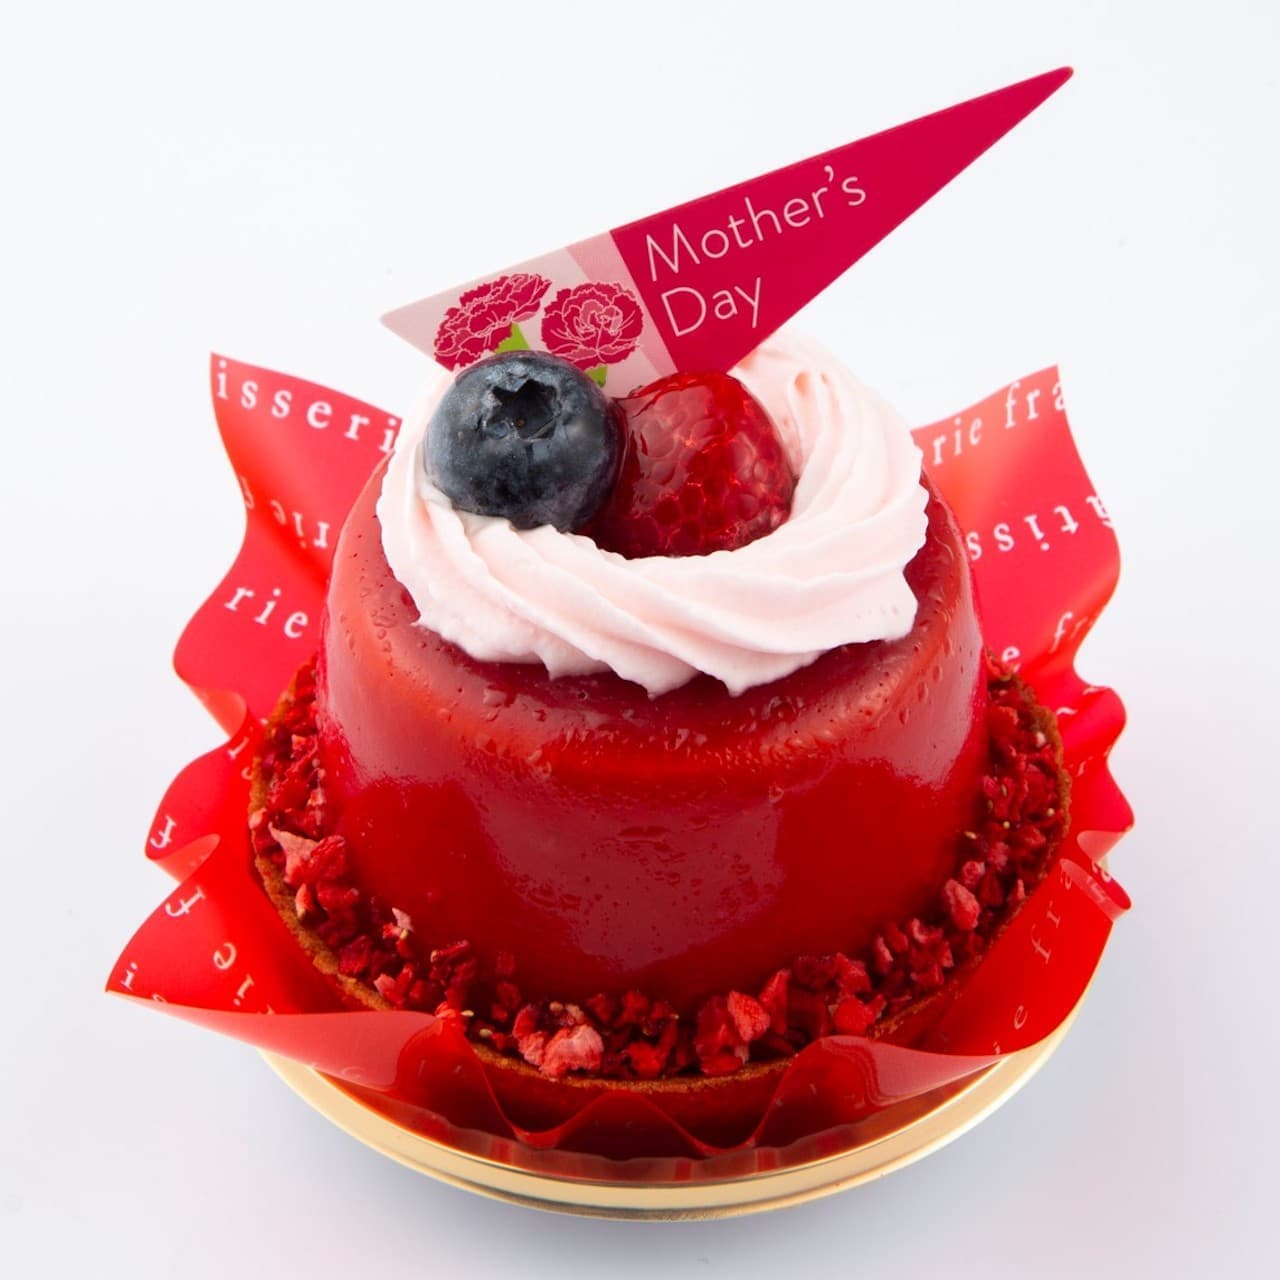 Chateraise "Mother's Day Caramel Berry